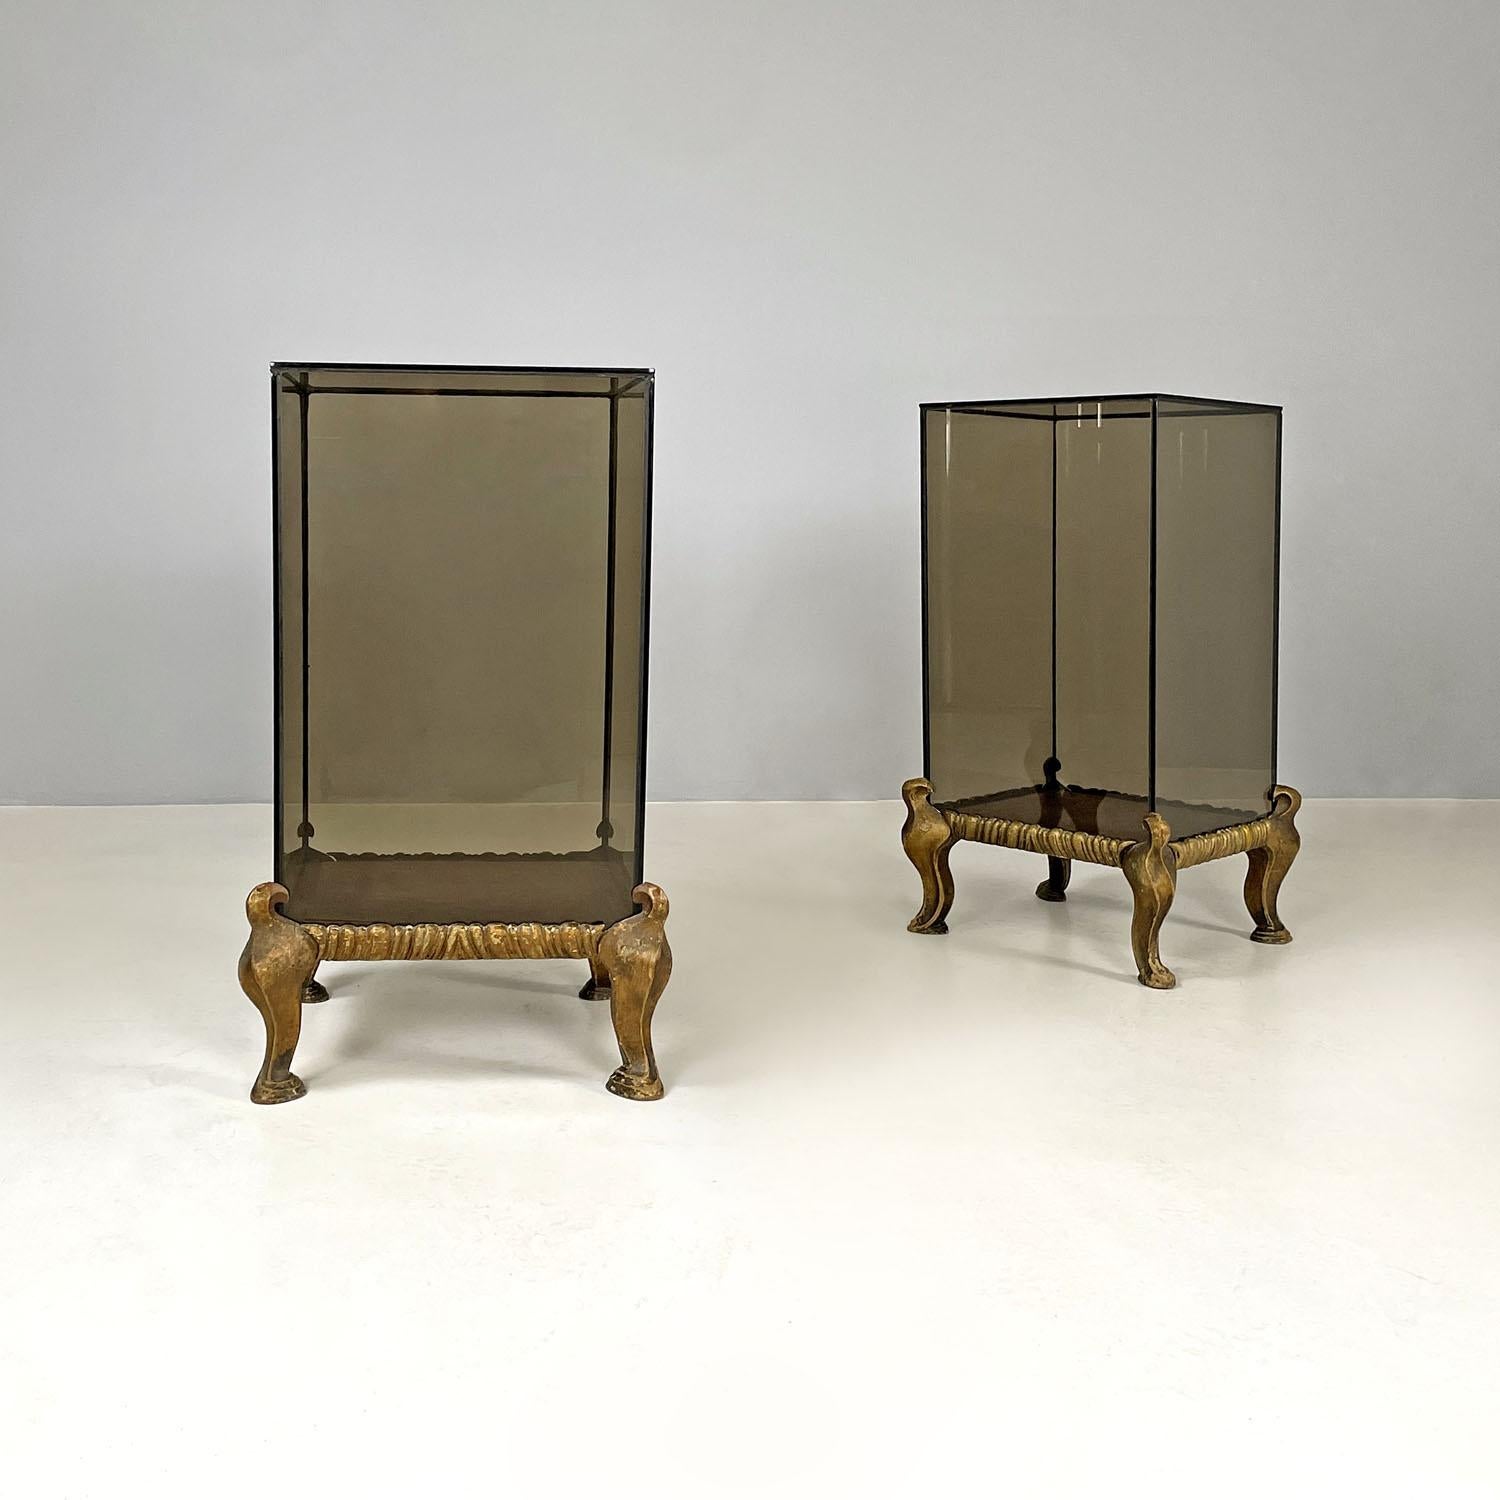 Italian modern golden wood and grey glass coffee tables or pedestals, 1970s
Pair of square-based coffee tables. The wooden base is decorated and sculpted and is painted in a golden color, it has four shaped legs with curved lines. A structure with a